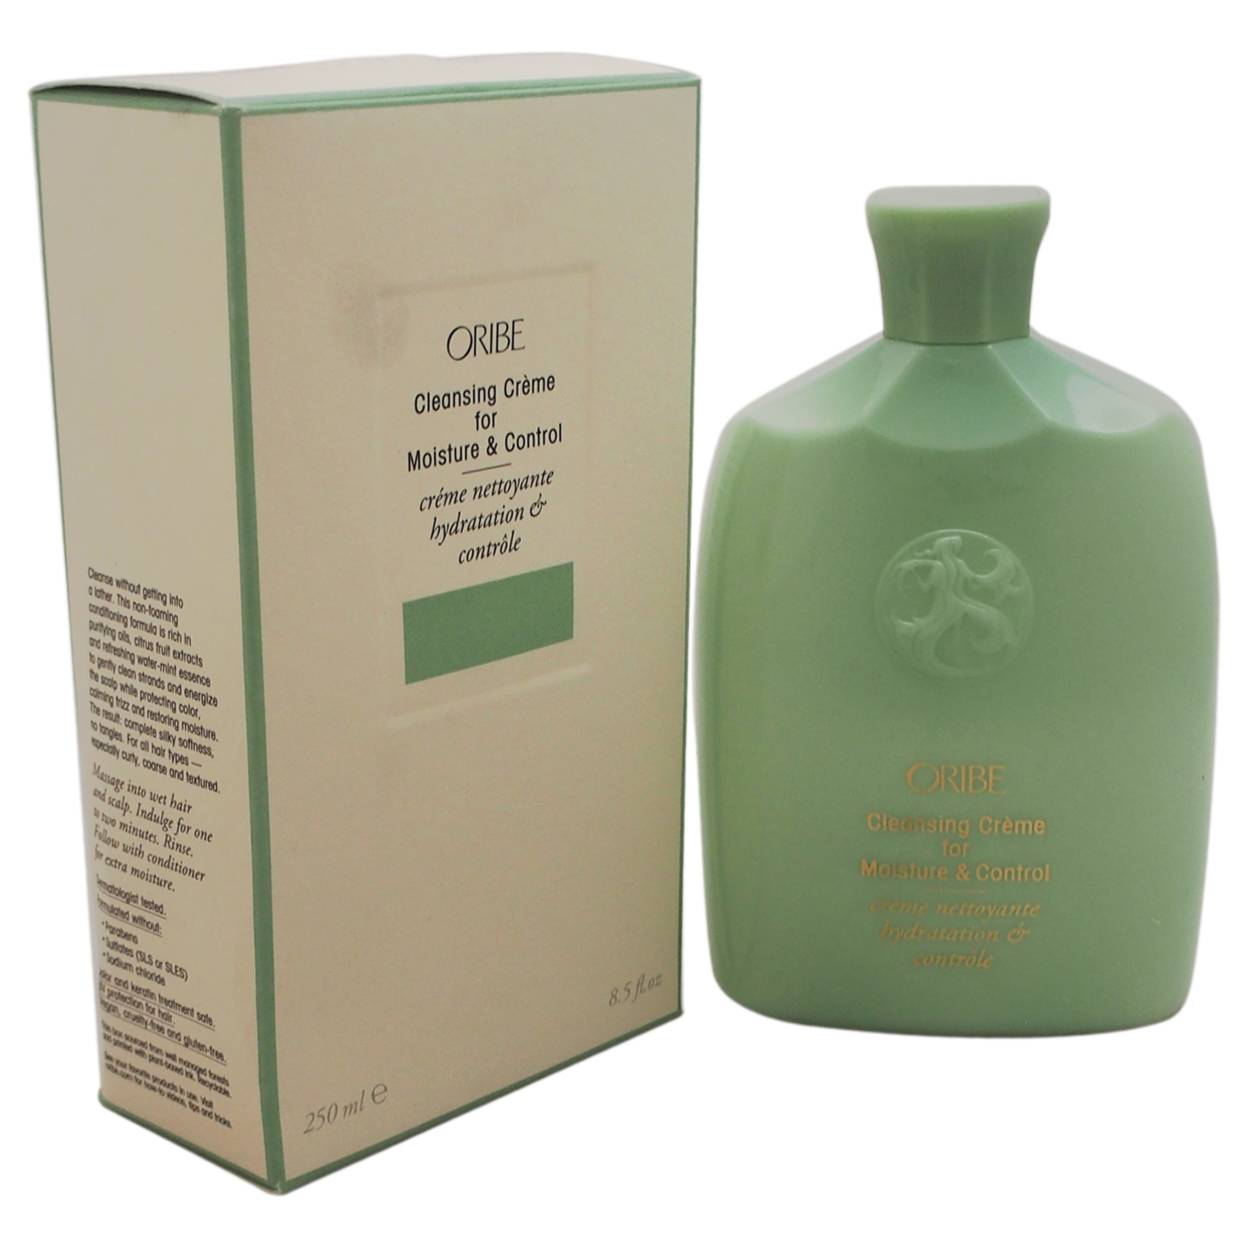 Cleansing creme. Oribe Cleansing Creme for Moisture and Control. Oribe Cleansing Creme for Moisture and Control 1000 мл. Oribe Cleansing Creme for Moisture and Control (Liter. Cleansing Creme for Moisture and Control 1 l.